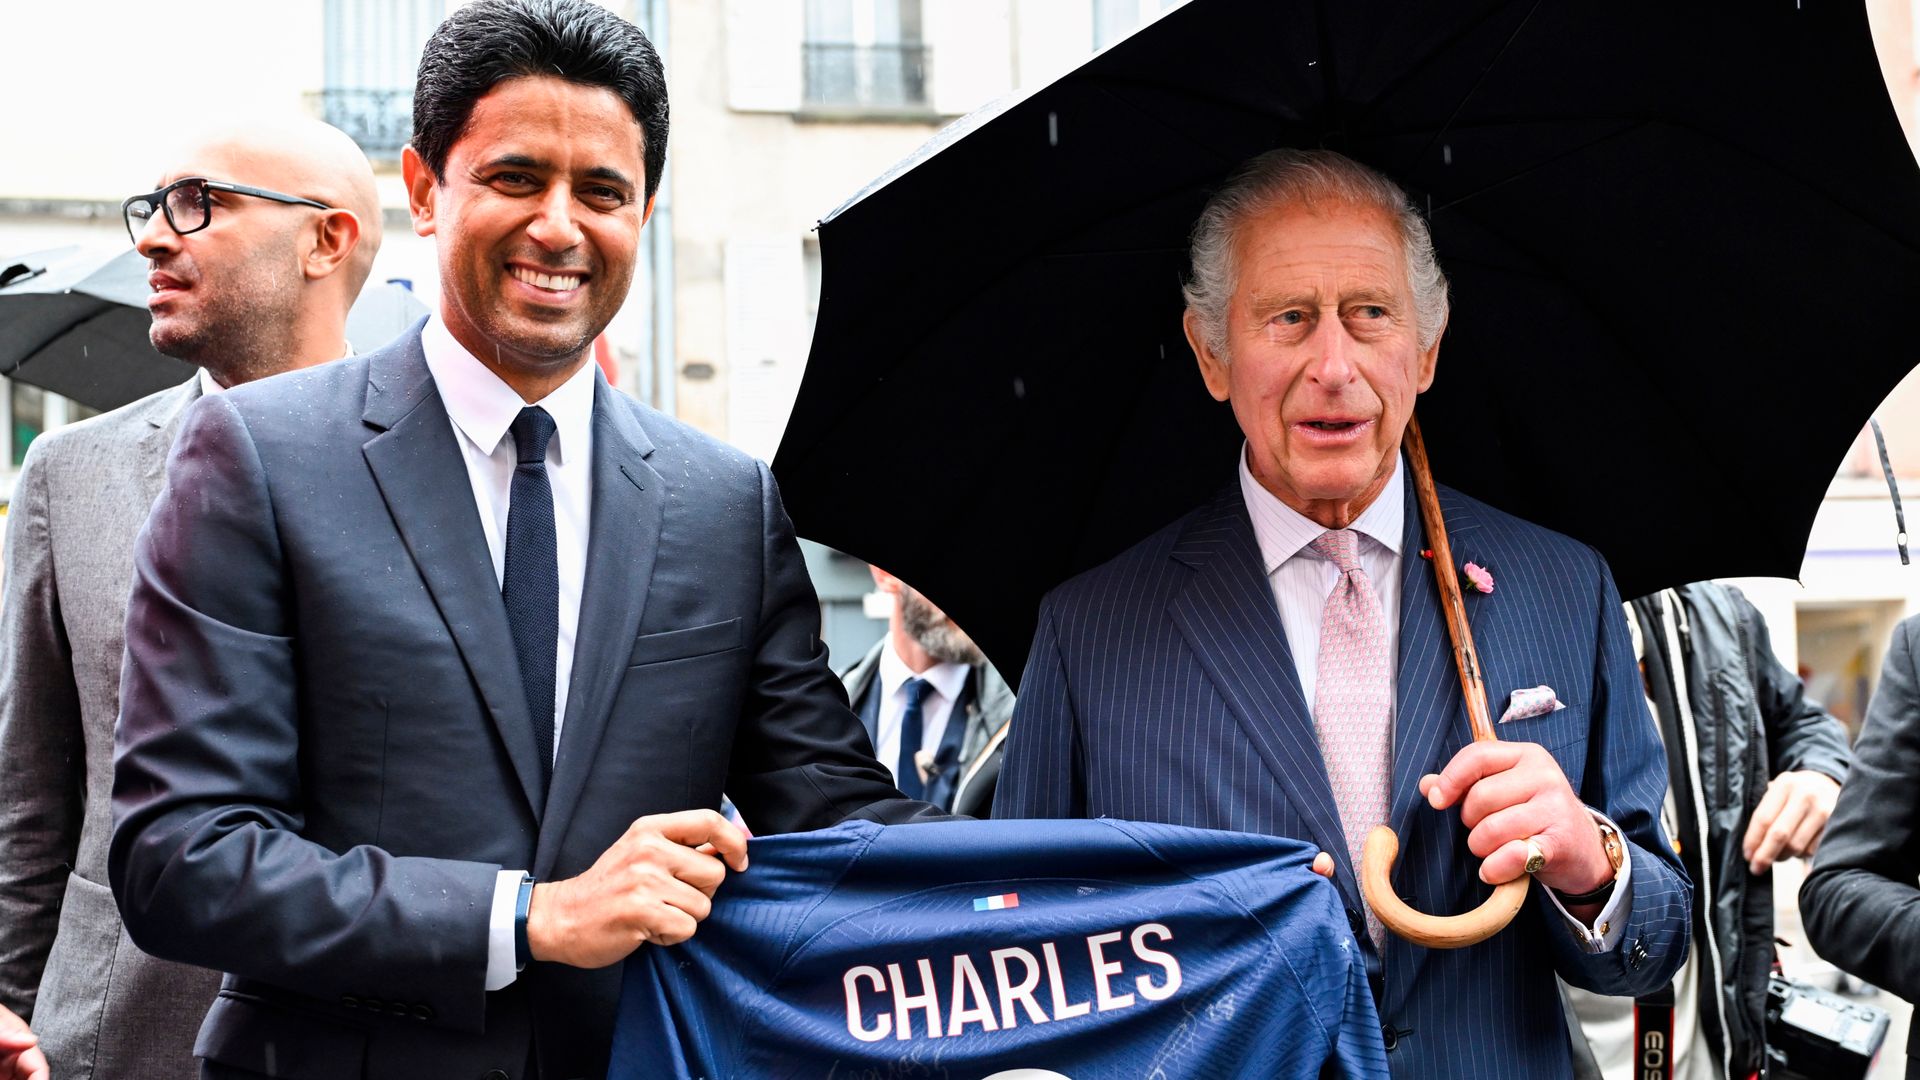 Transfer Centre LIVE! PSG present shirt to... King Charles III!